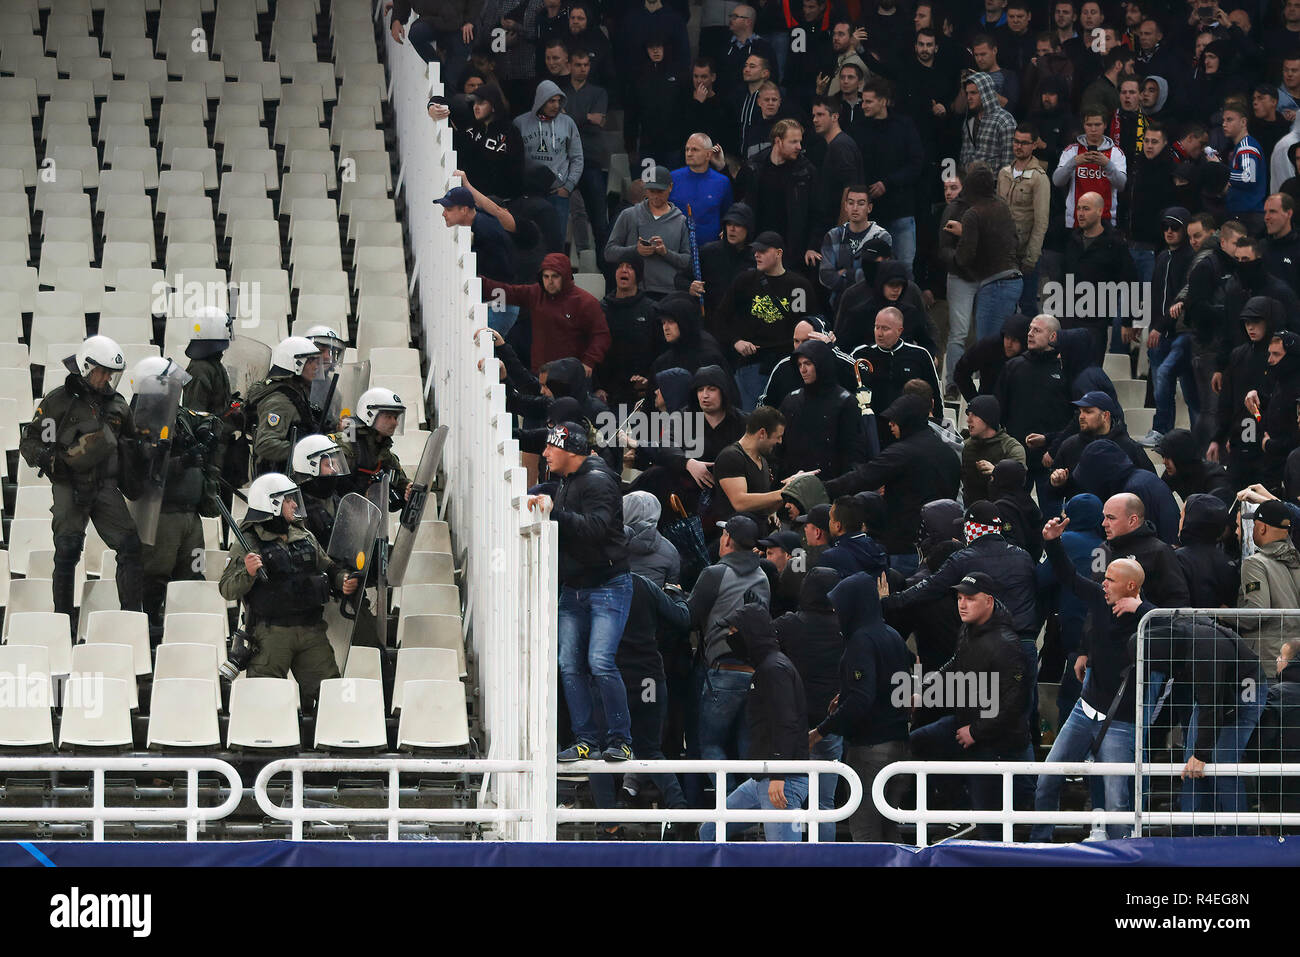 Athens, Greece. 27th November, 2018. ATHENS, Olympic Stadium, AEK Athens FC  - Ajax , football, Champions League, season 2018-2019, 27-11-2018, Ajax  fans fighting with police on the stands during the game AEK